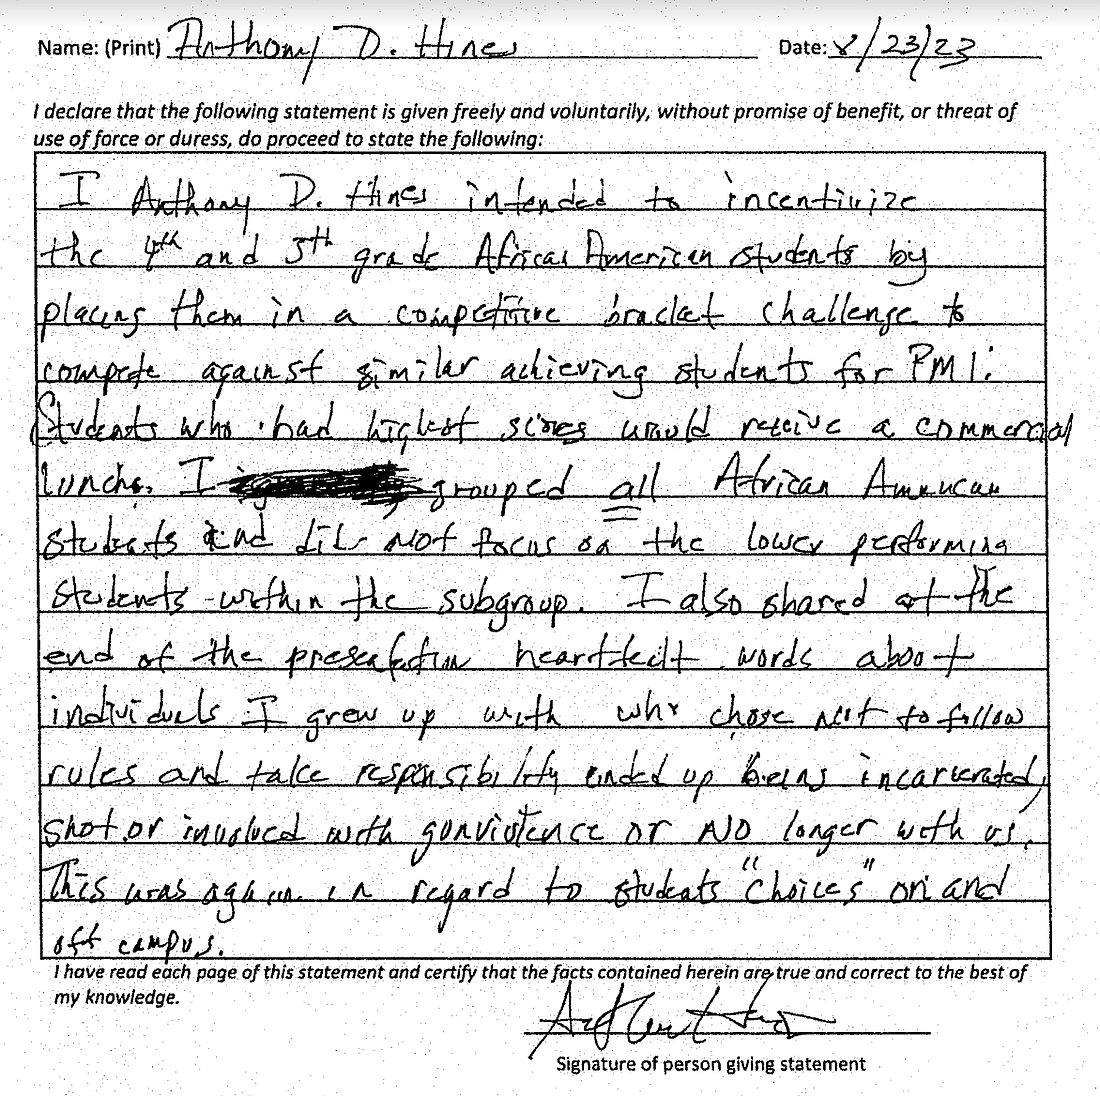 Screen shot of Anthony Hines' witness statement included in the investigation report.